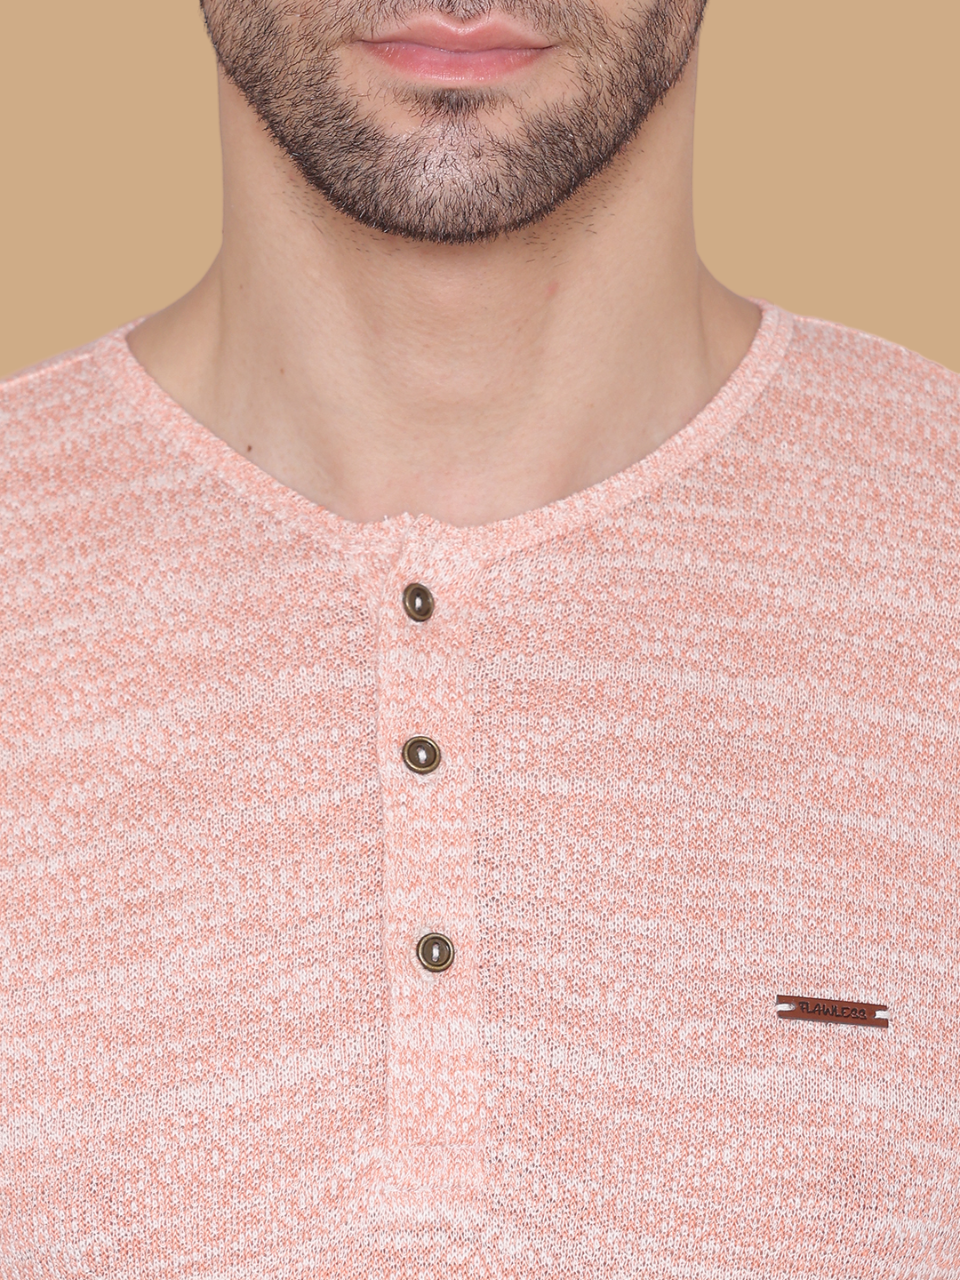 FLAWLESS MEN WINTER PEACH KNITTED T-SHIRT Being Flawless